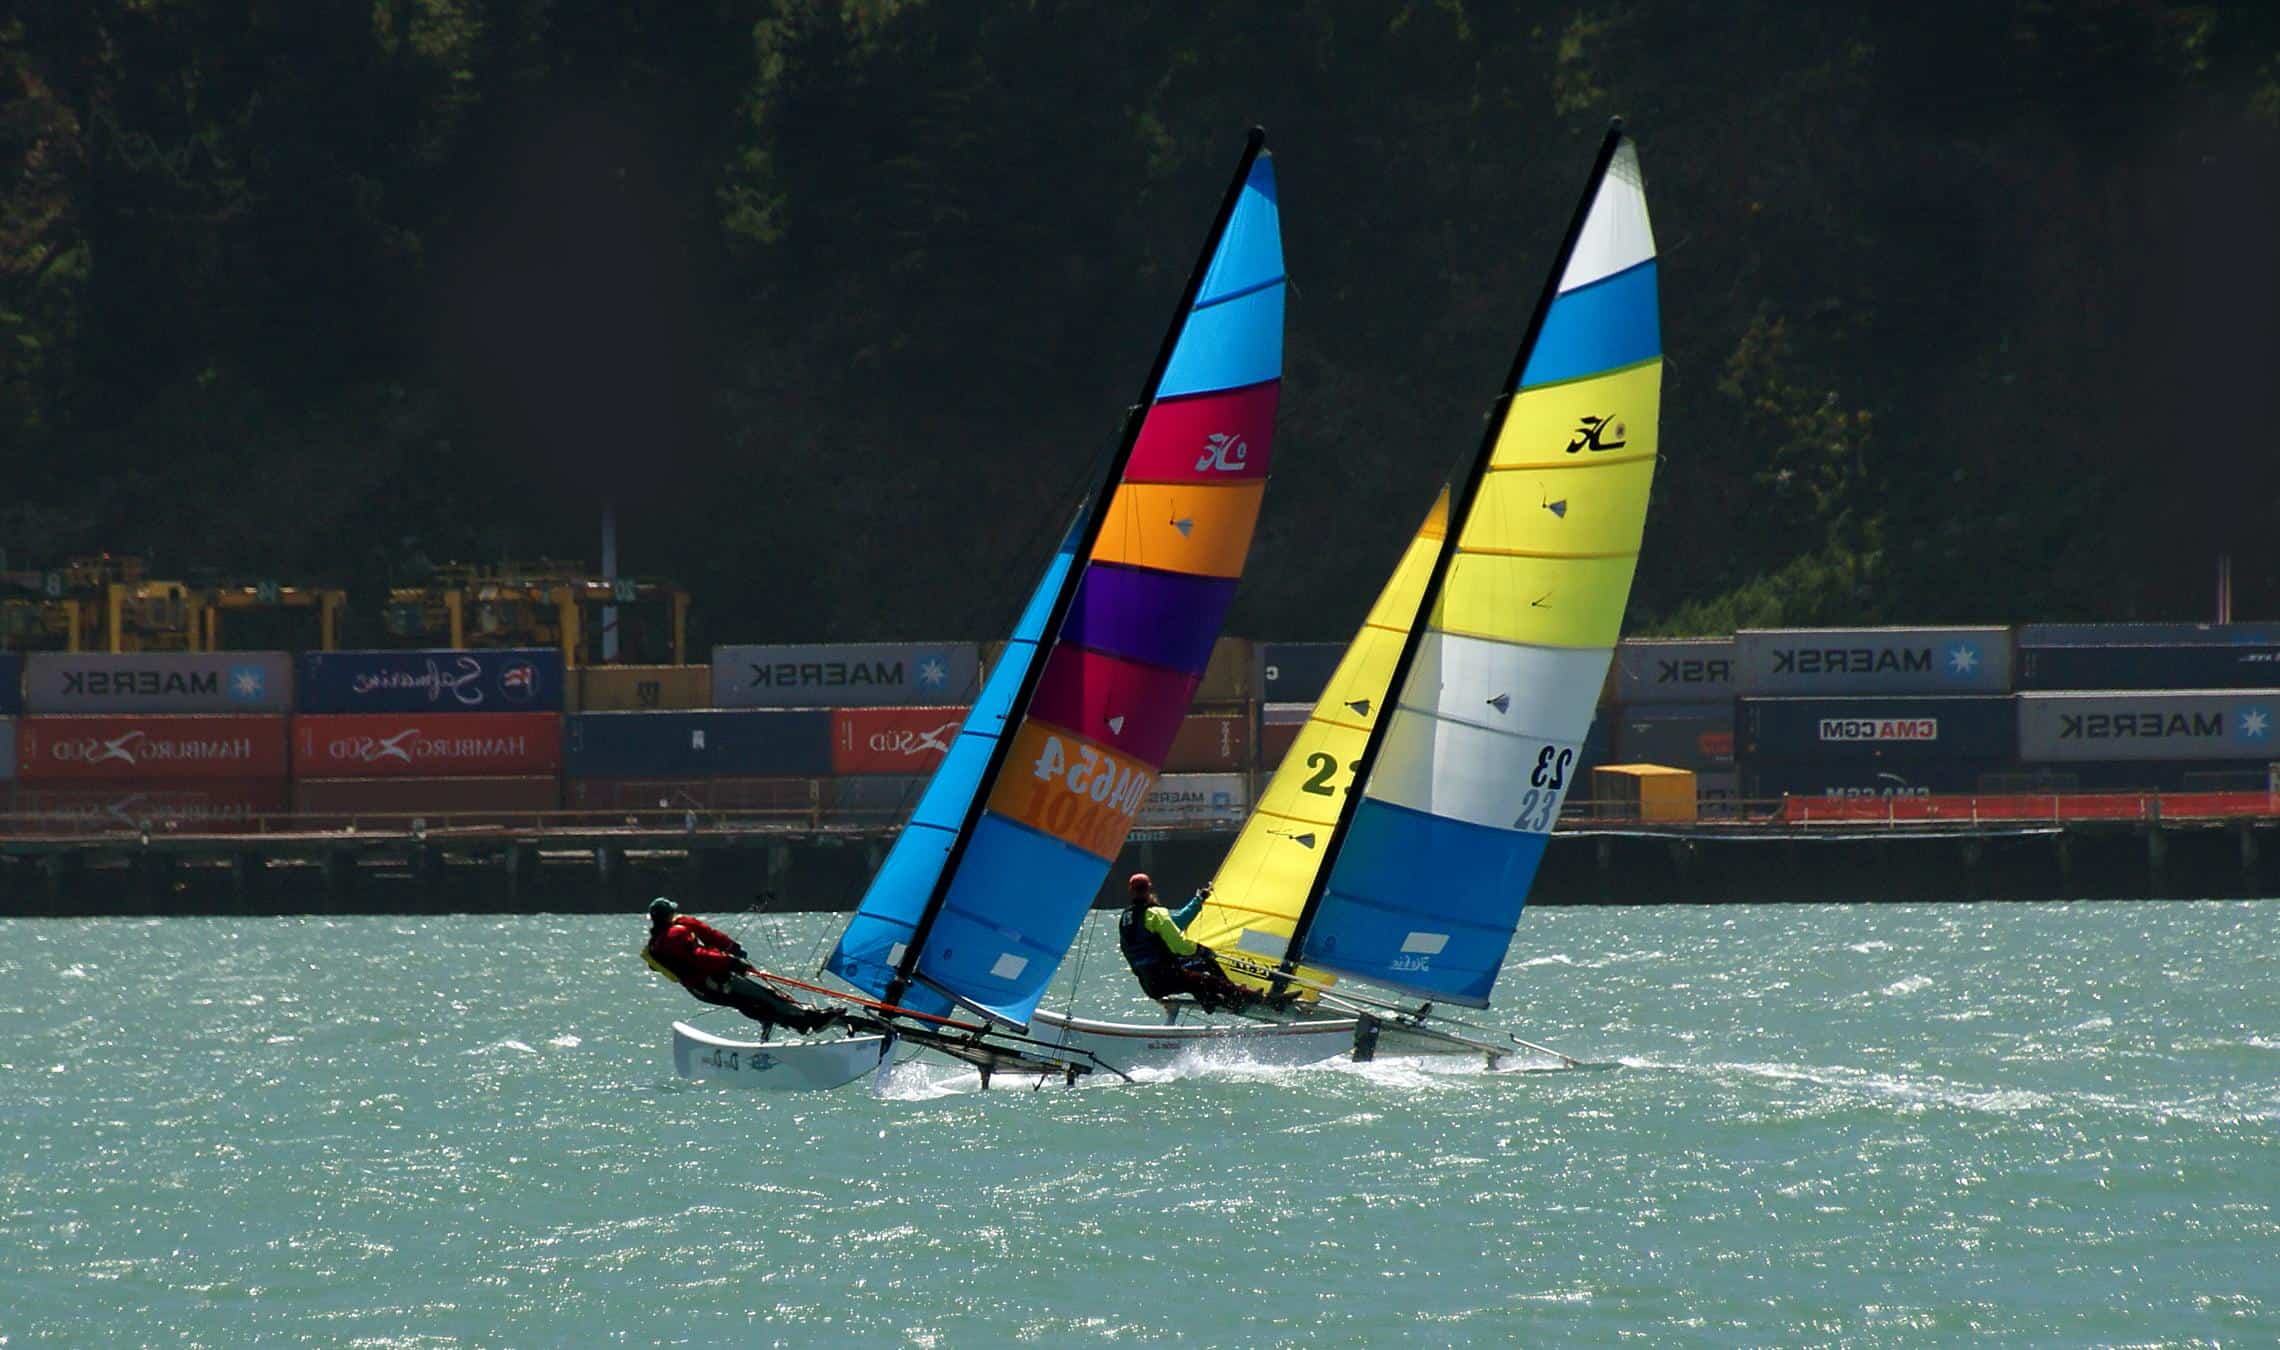 Free picture: sport, race, watercraft, competition, vehicle, water ...